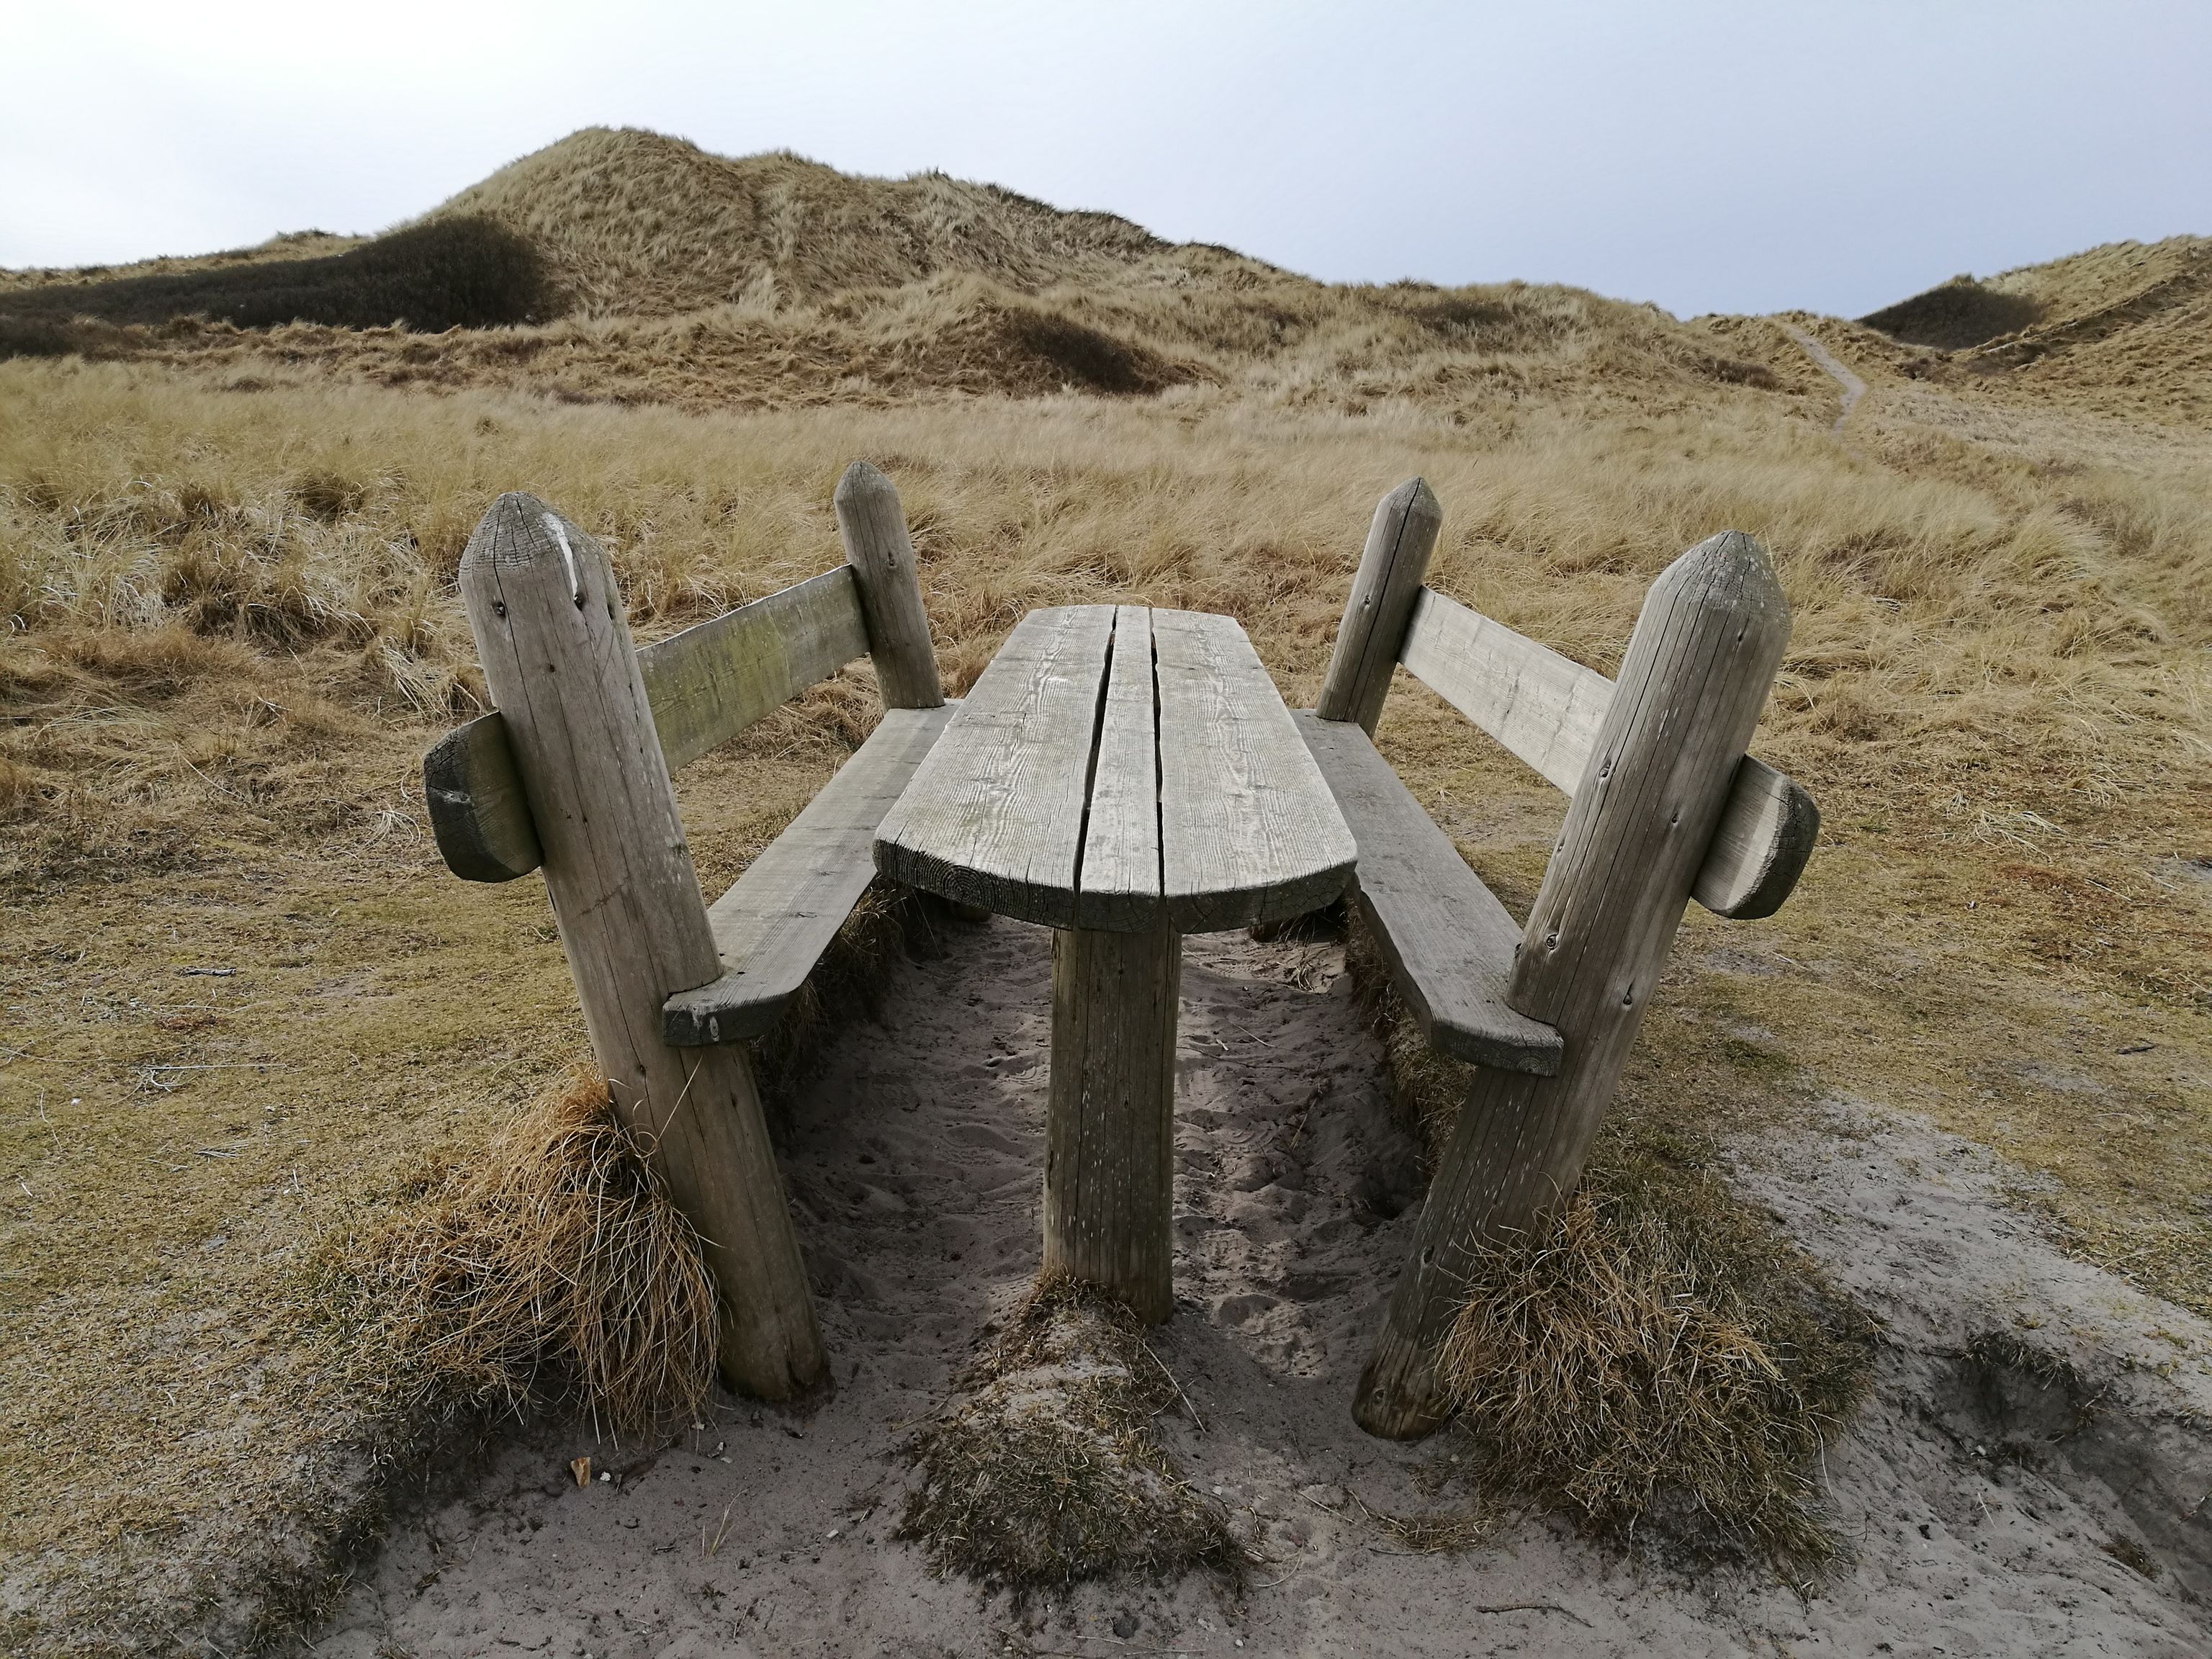 Two wooden benches at a wooden table. A dune can be seen in the background.